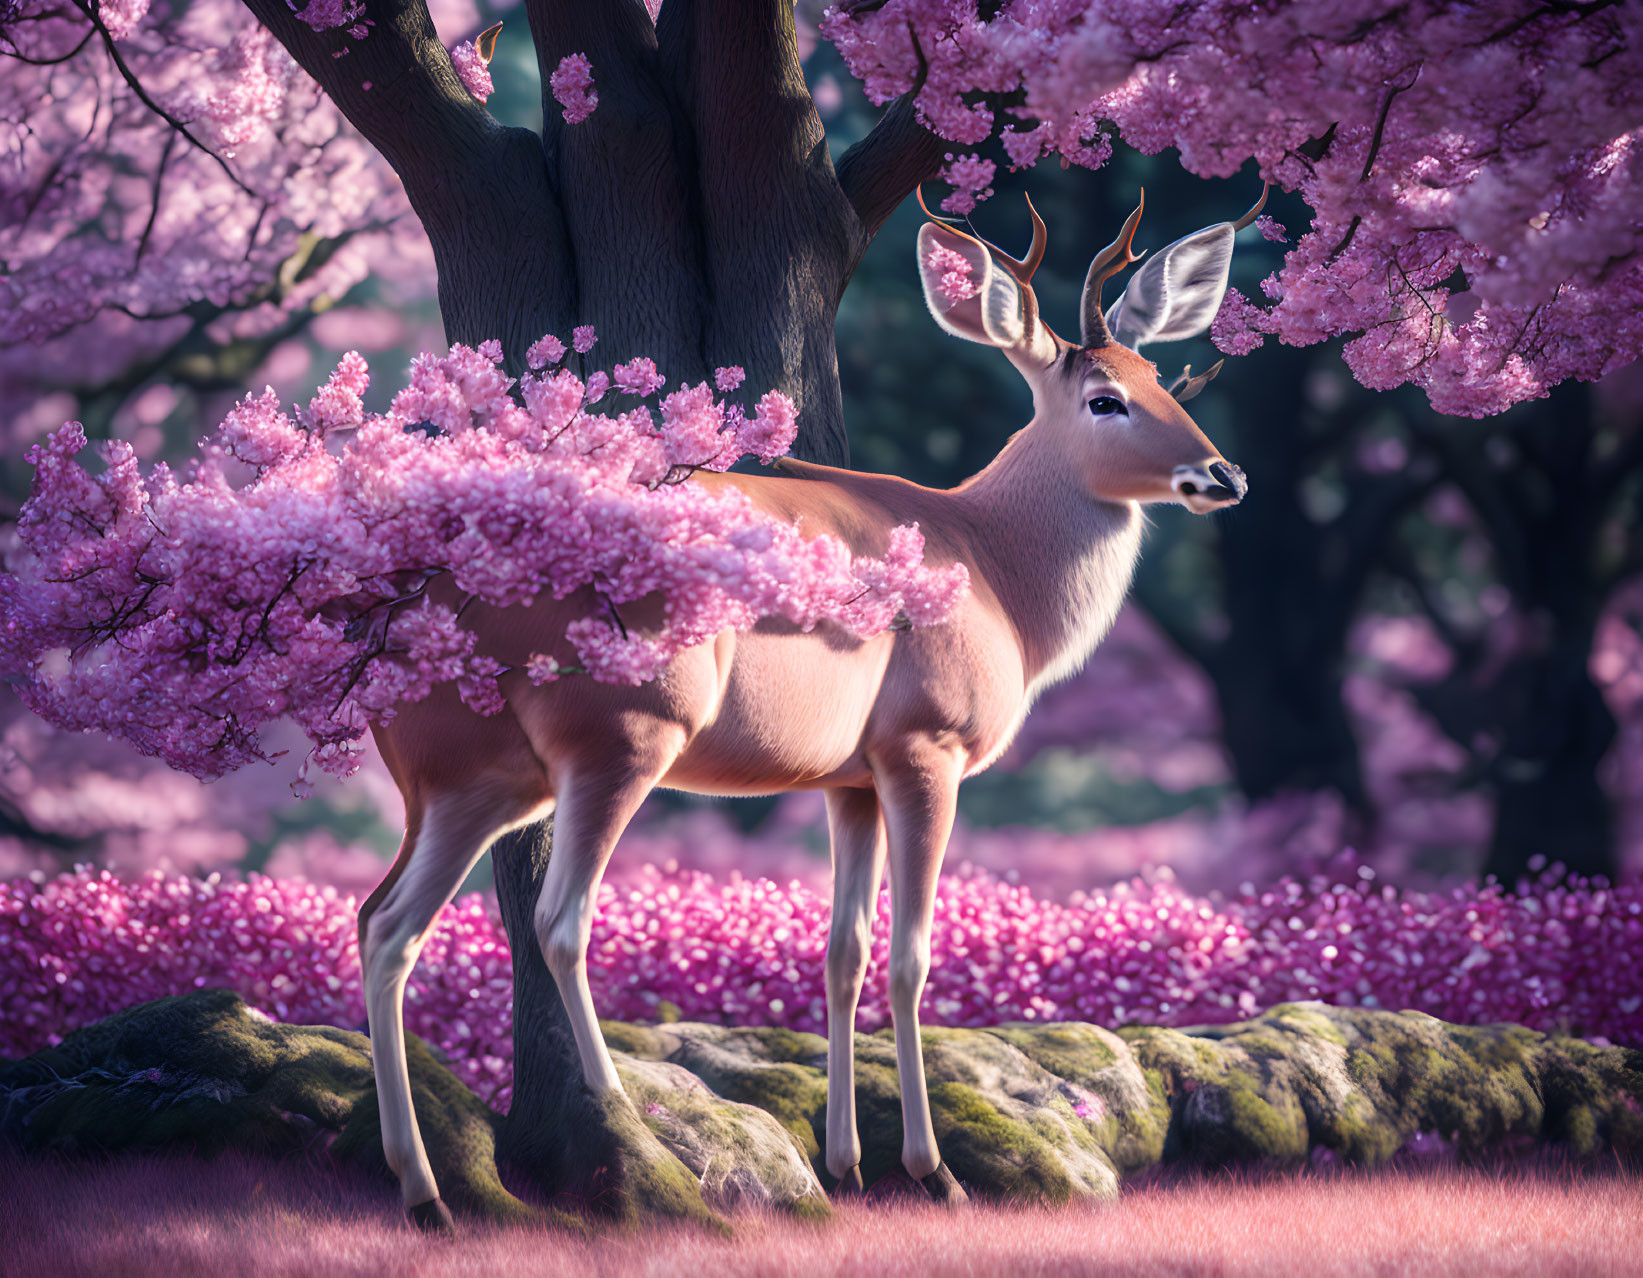 Majestic deer in pink cherry blossoms with sunlight filtering.